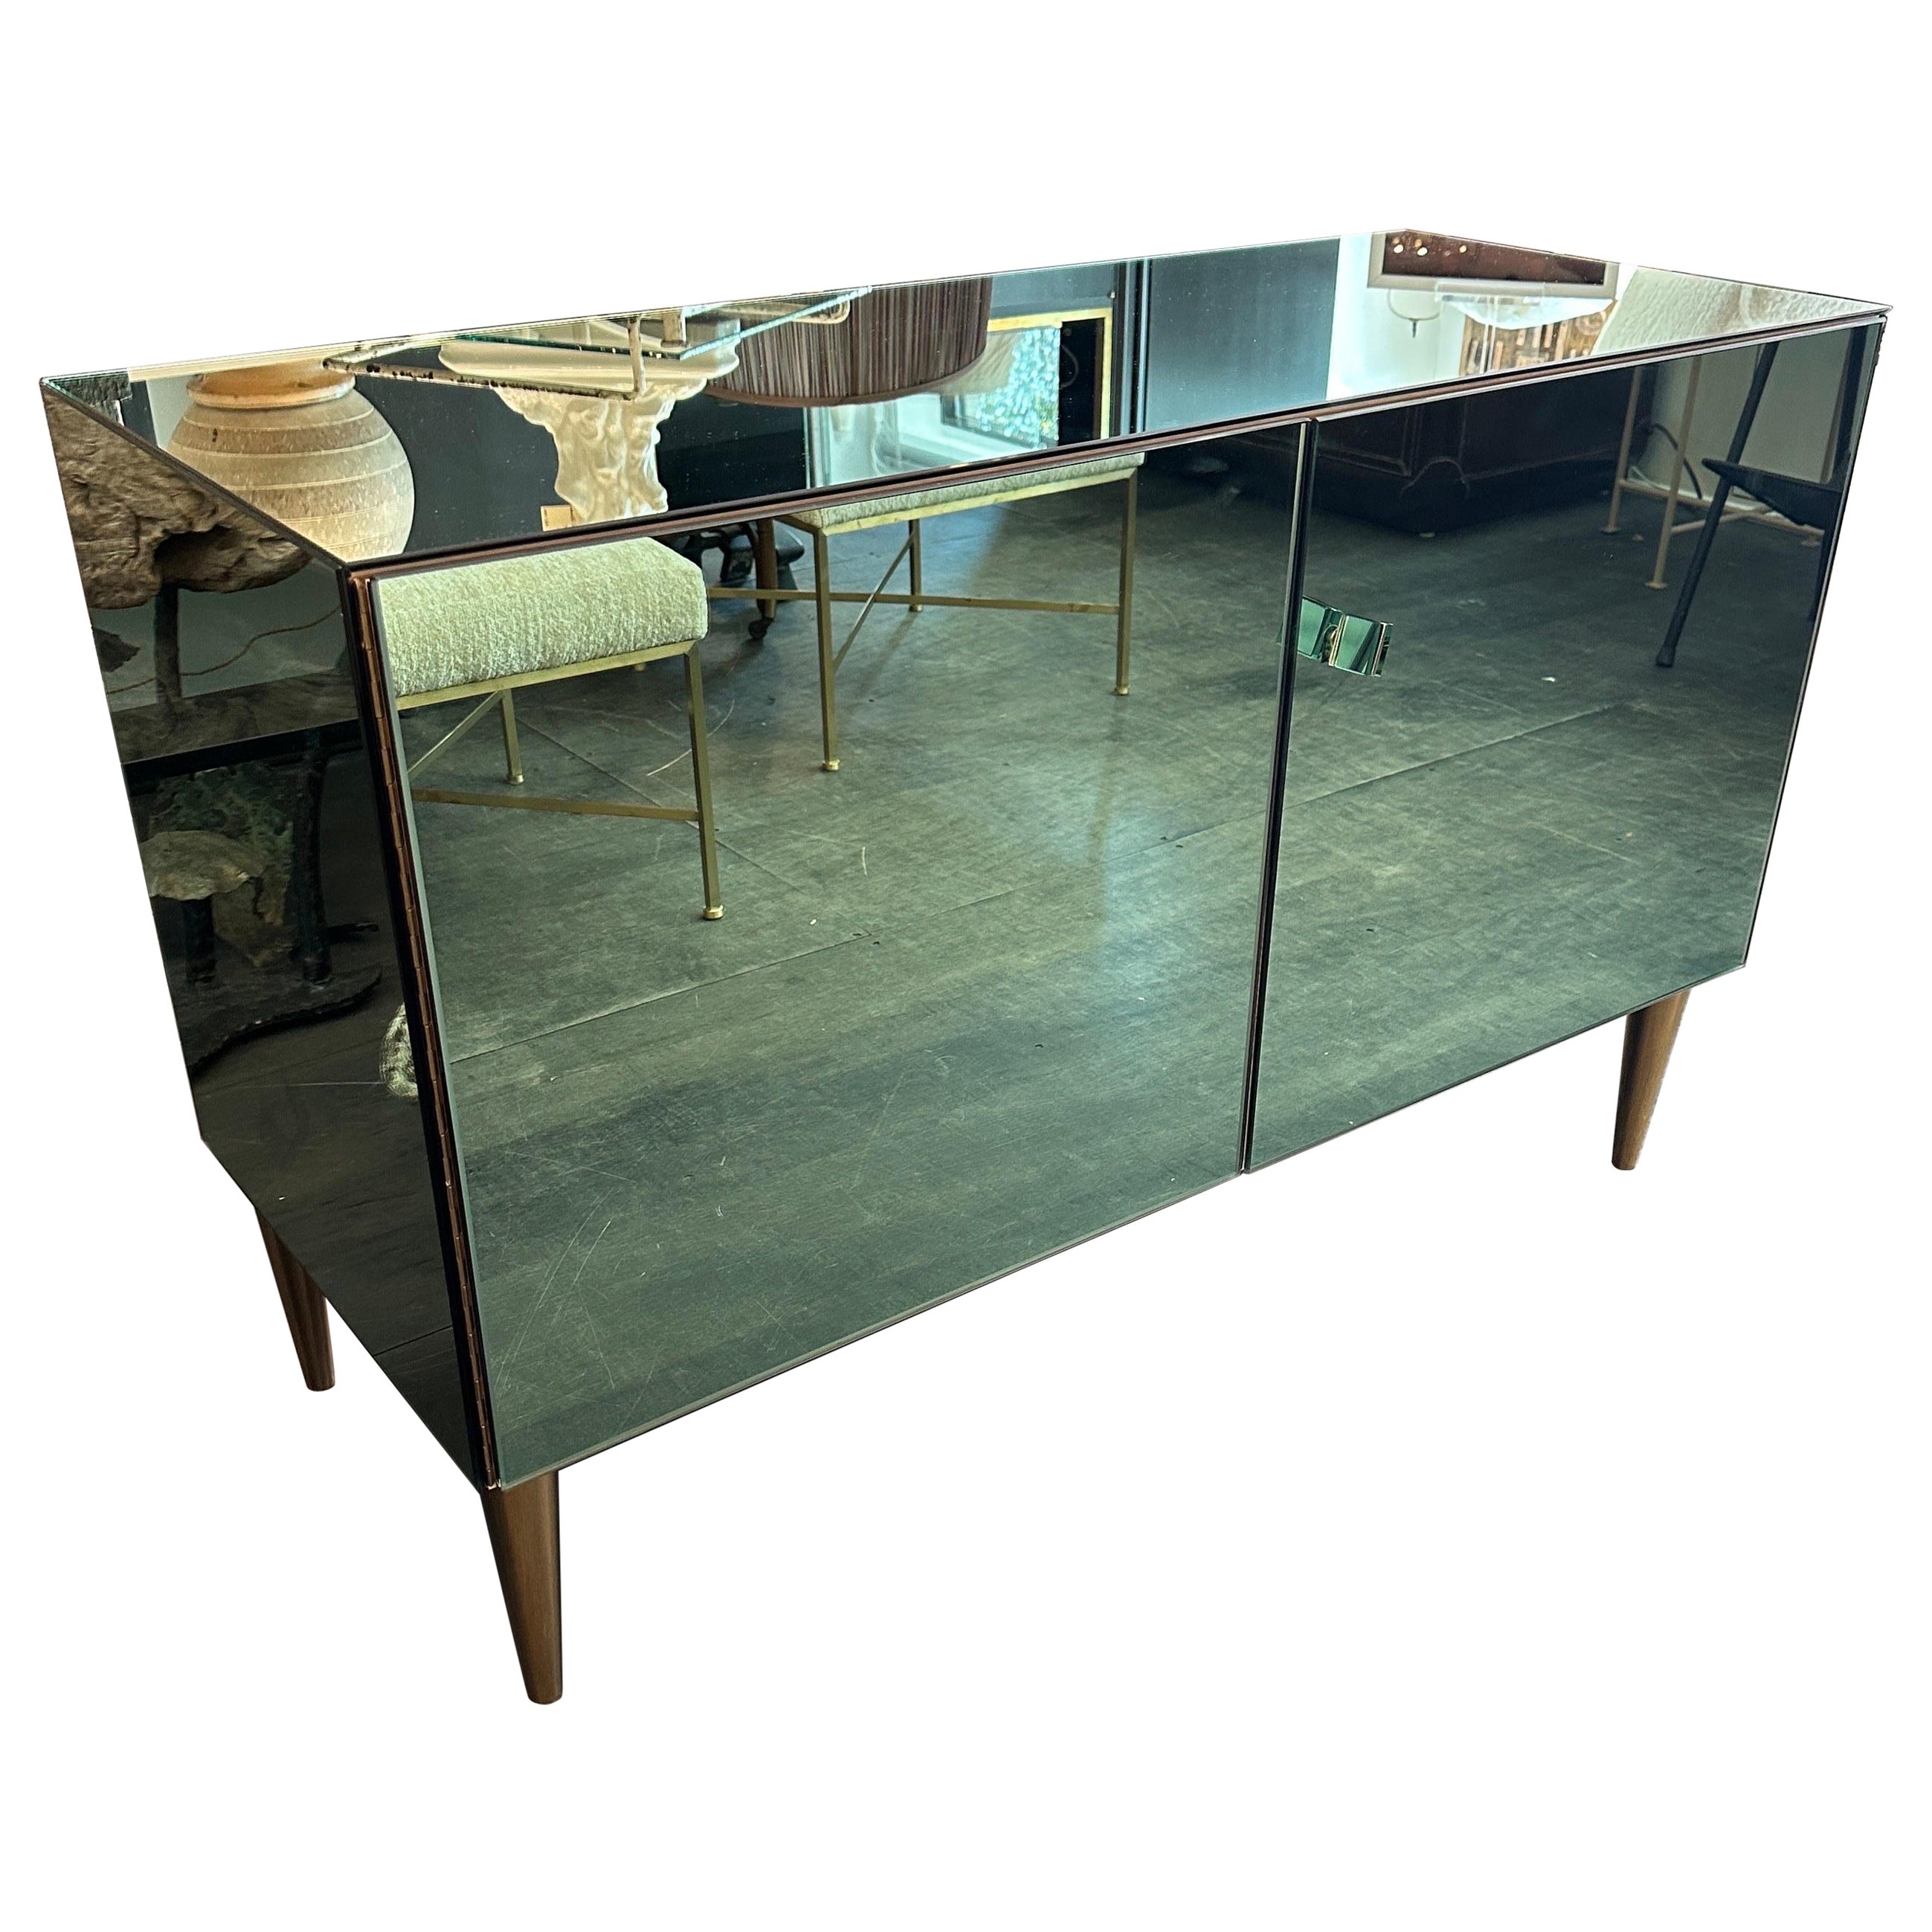 EFFETTO VETRO Italian Green Tinted Mirror Cabinet (Two Available)